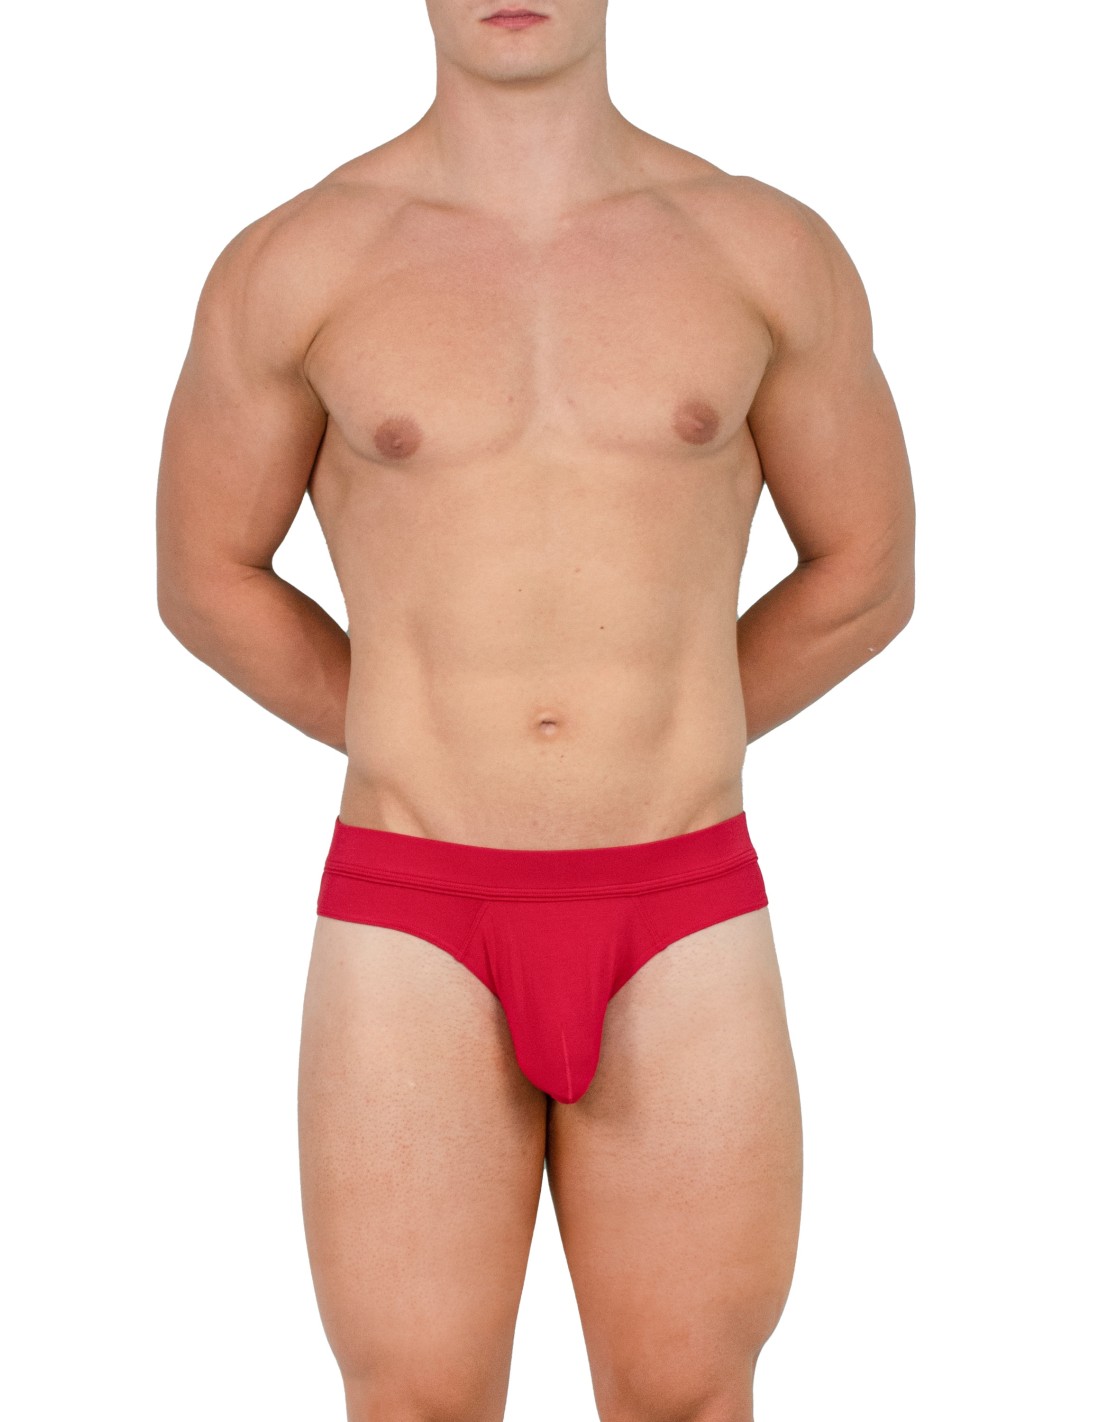 The PrimeMan Hipster Briefs feature the AnatoMAX anatomical shape